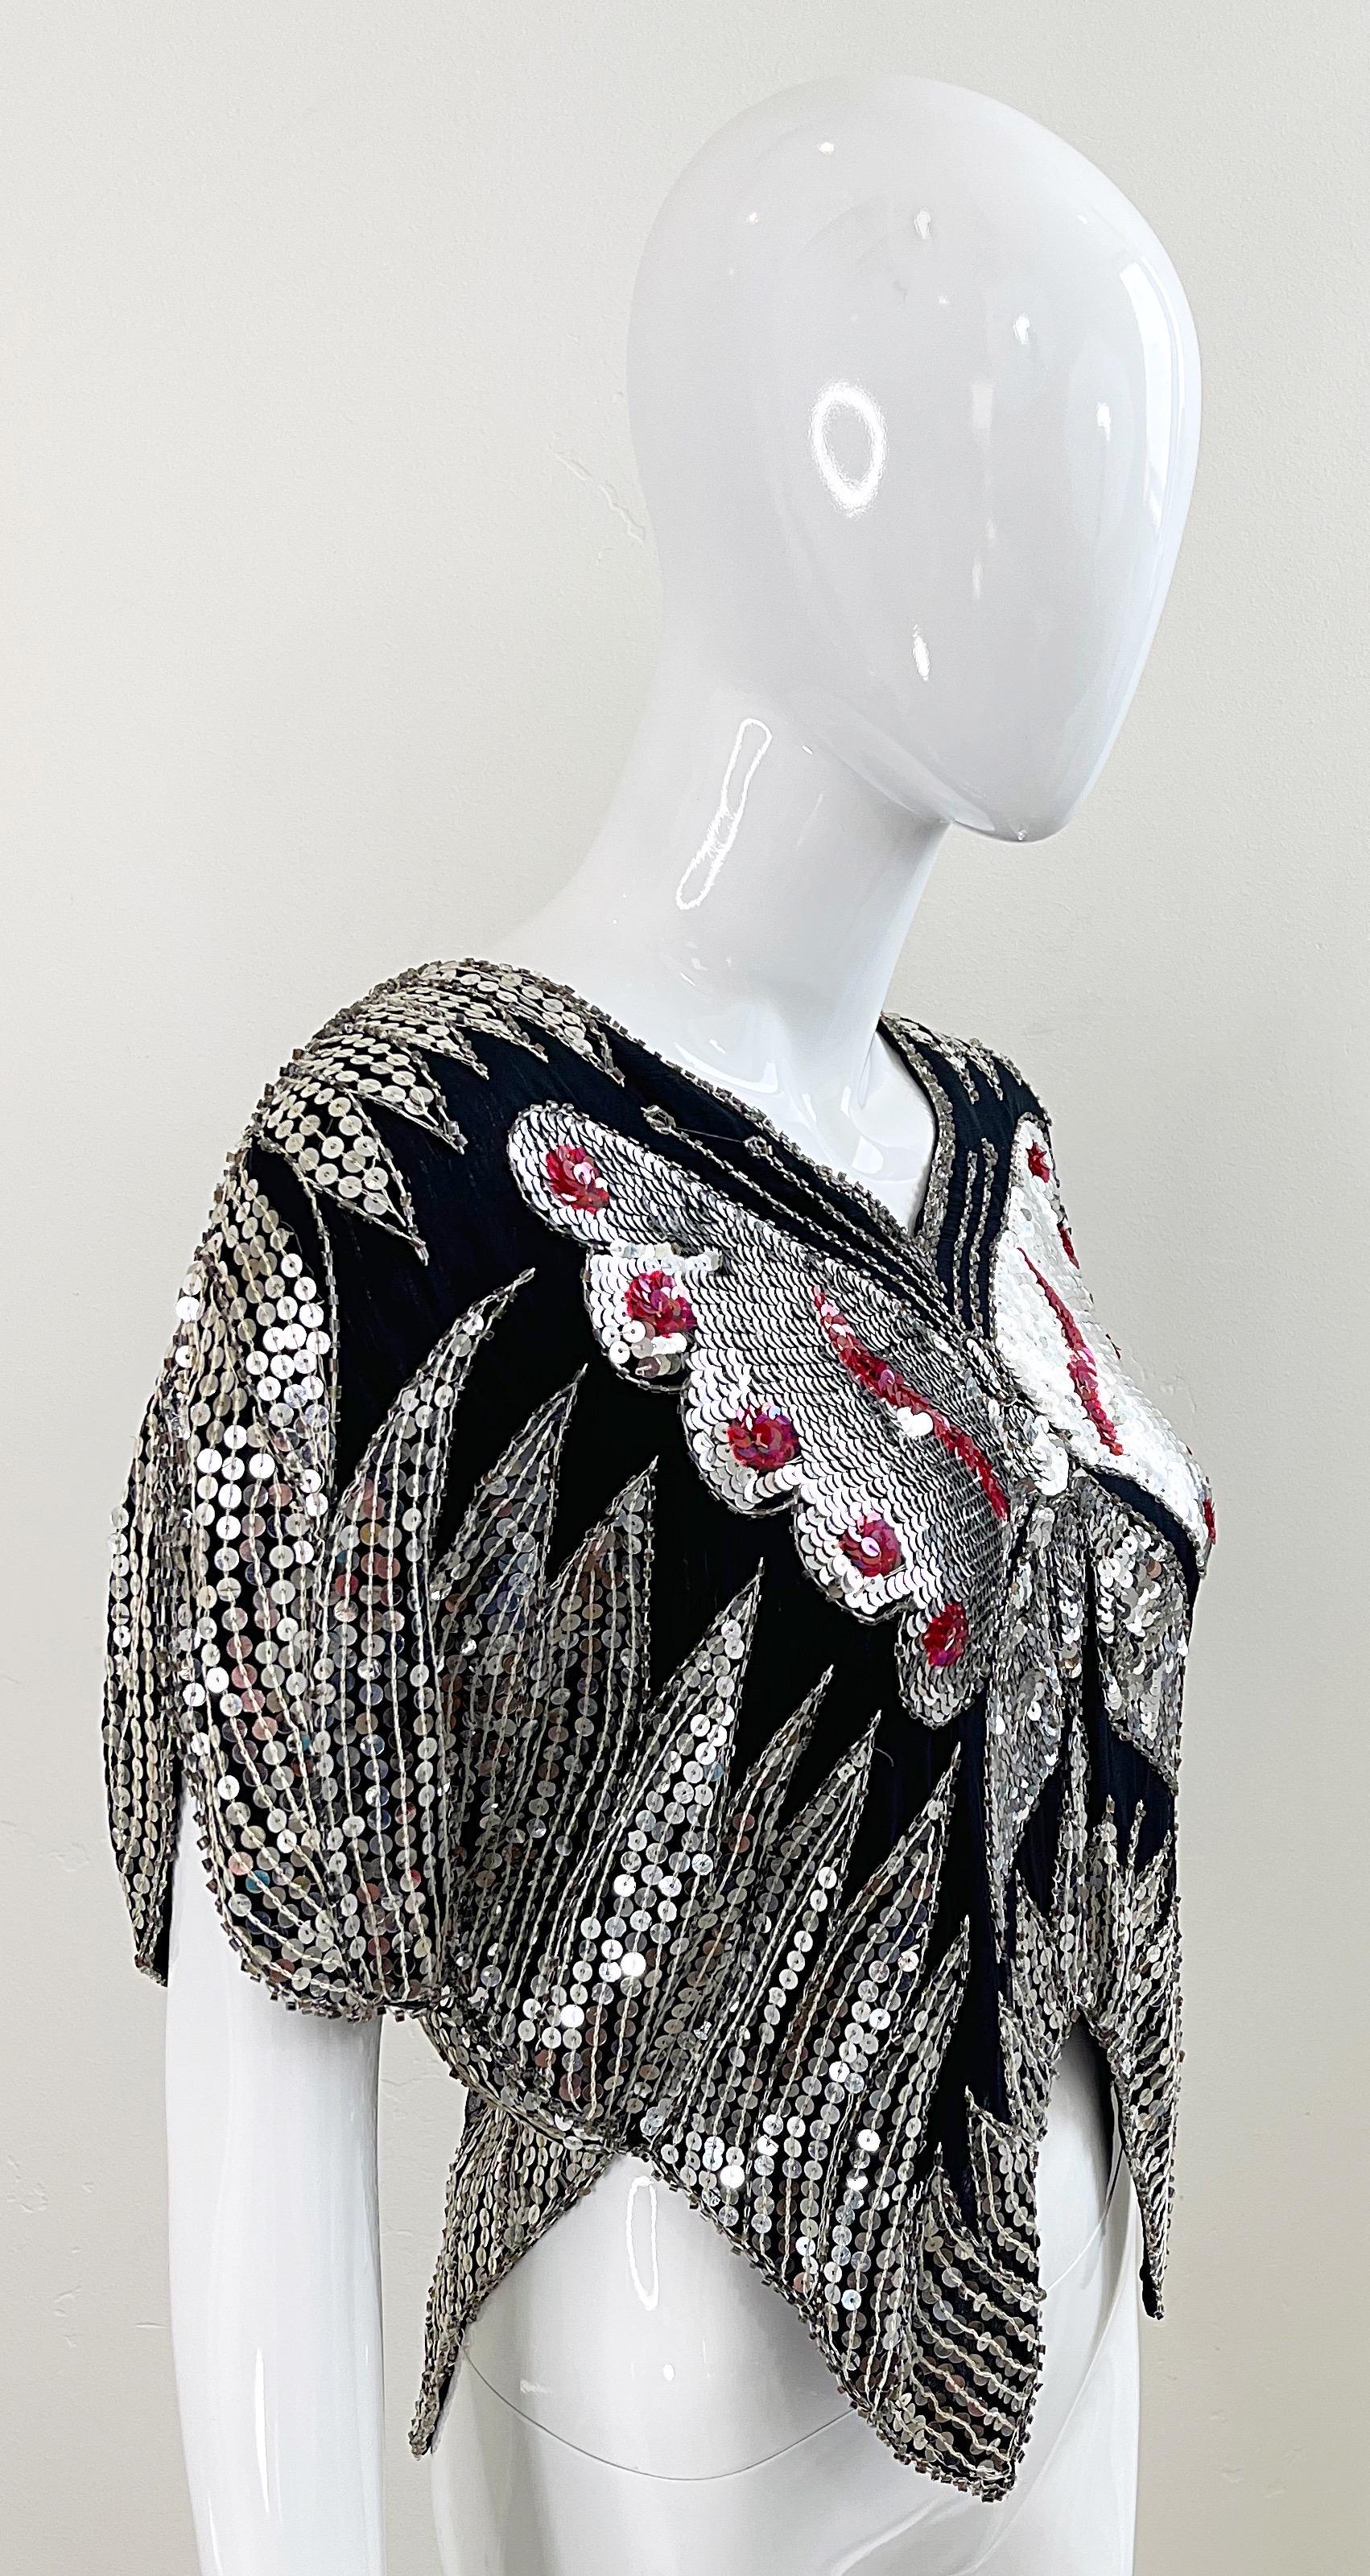 Studio 54 Early 1980s Butterfly Red Silver Black Sequin Disco Vintage 80s Top For Sale 6